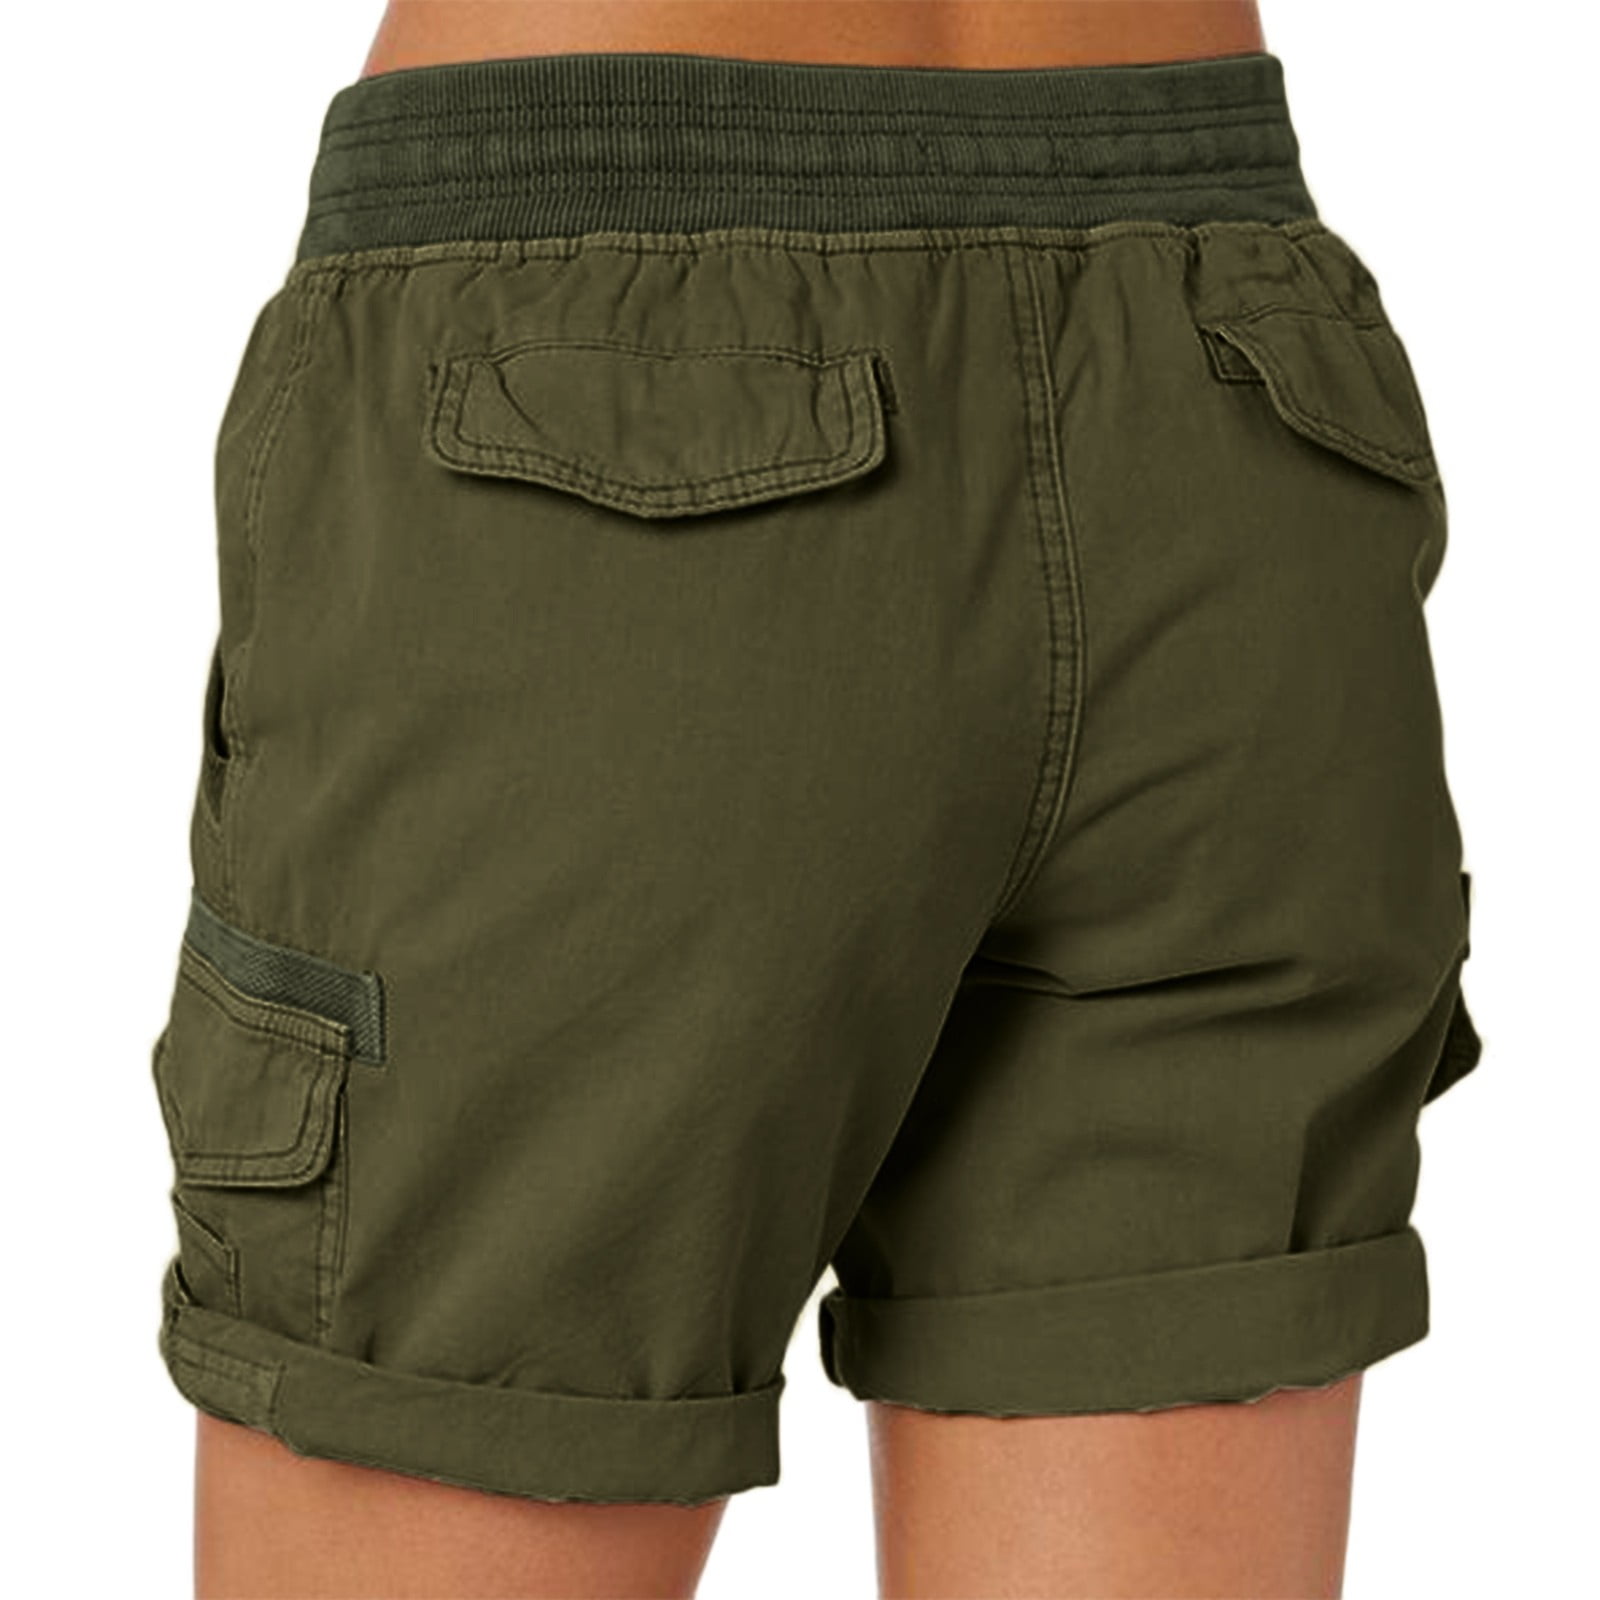 Aayomet Plus Size Shorts for Women Women Cargo Shorts Summer Loose Hiking  Shorts With Pockets,Brown XXL 